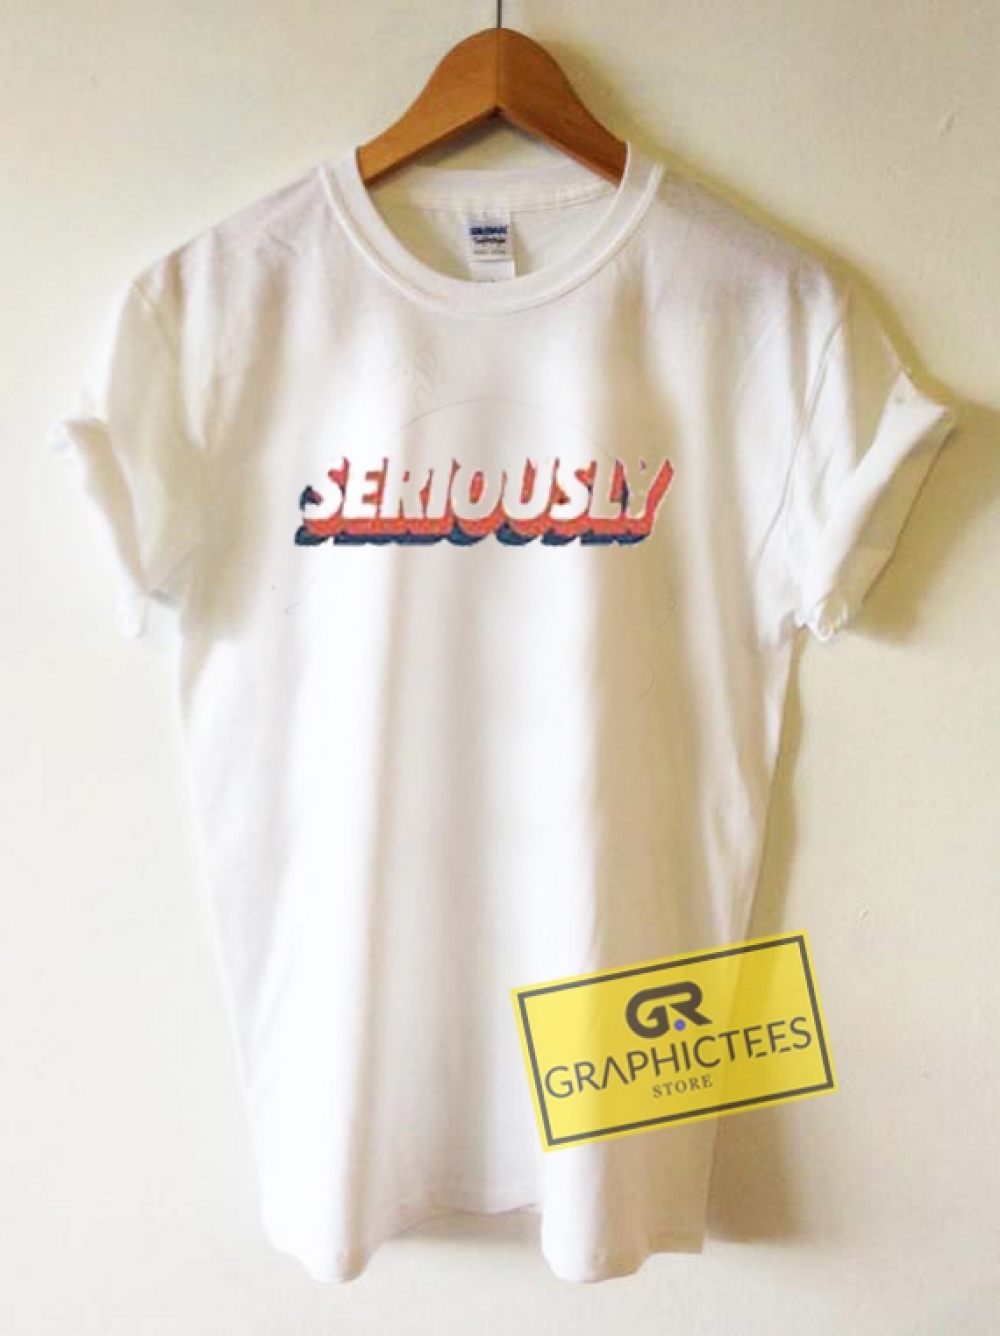 Seriously Graphic Tees Shirts - graphicteestore